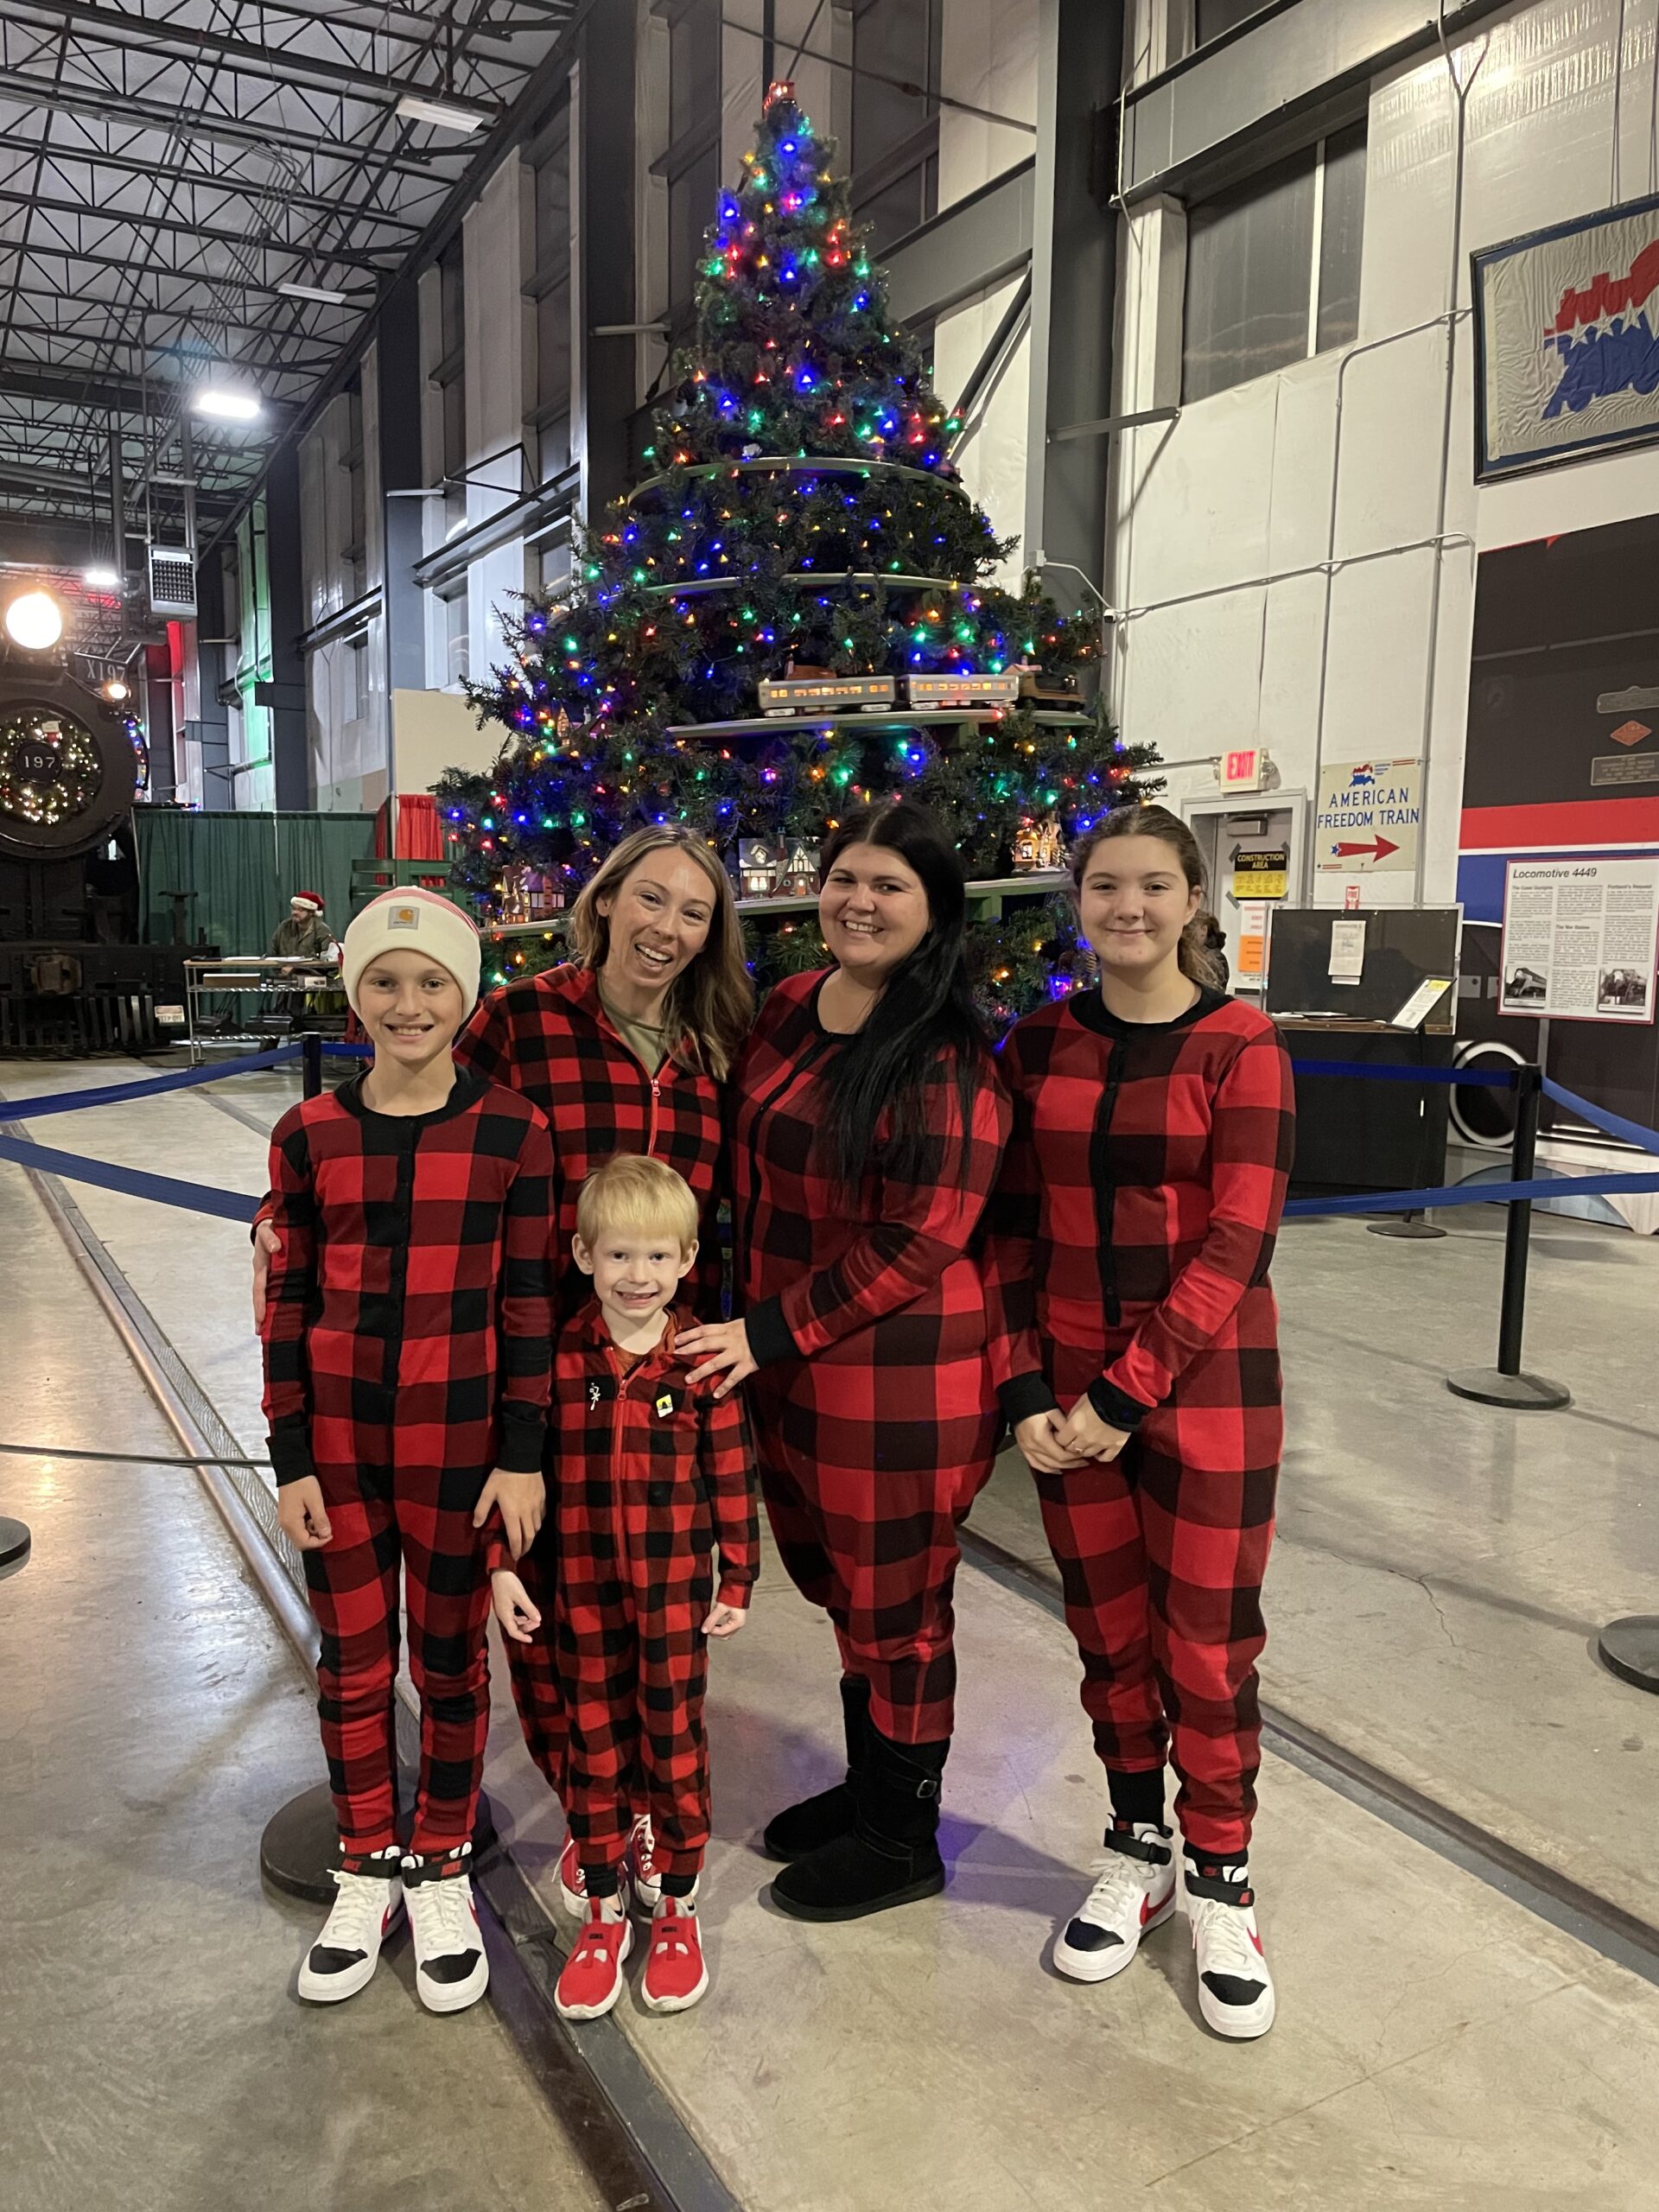 A family of 5 standing in front of a Christmas tree at the Oregon Rail Heritage Center in matching red plaid pajamas.